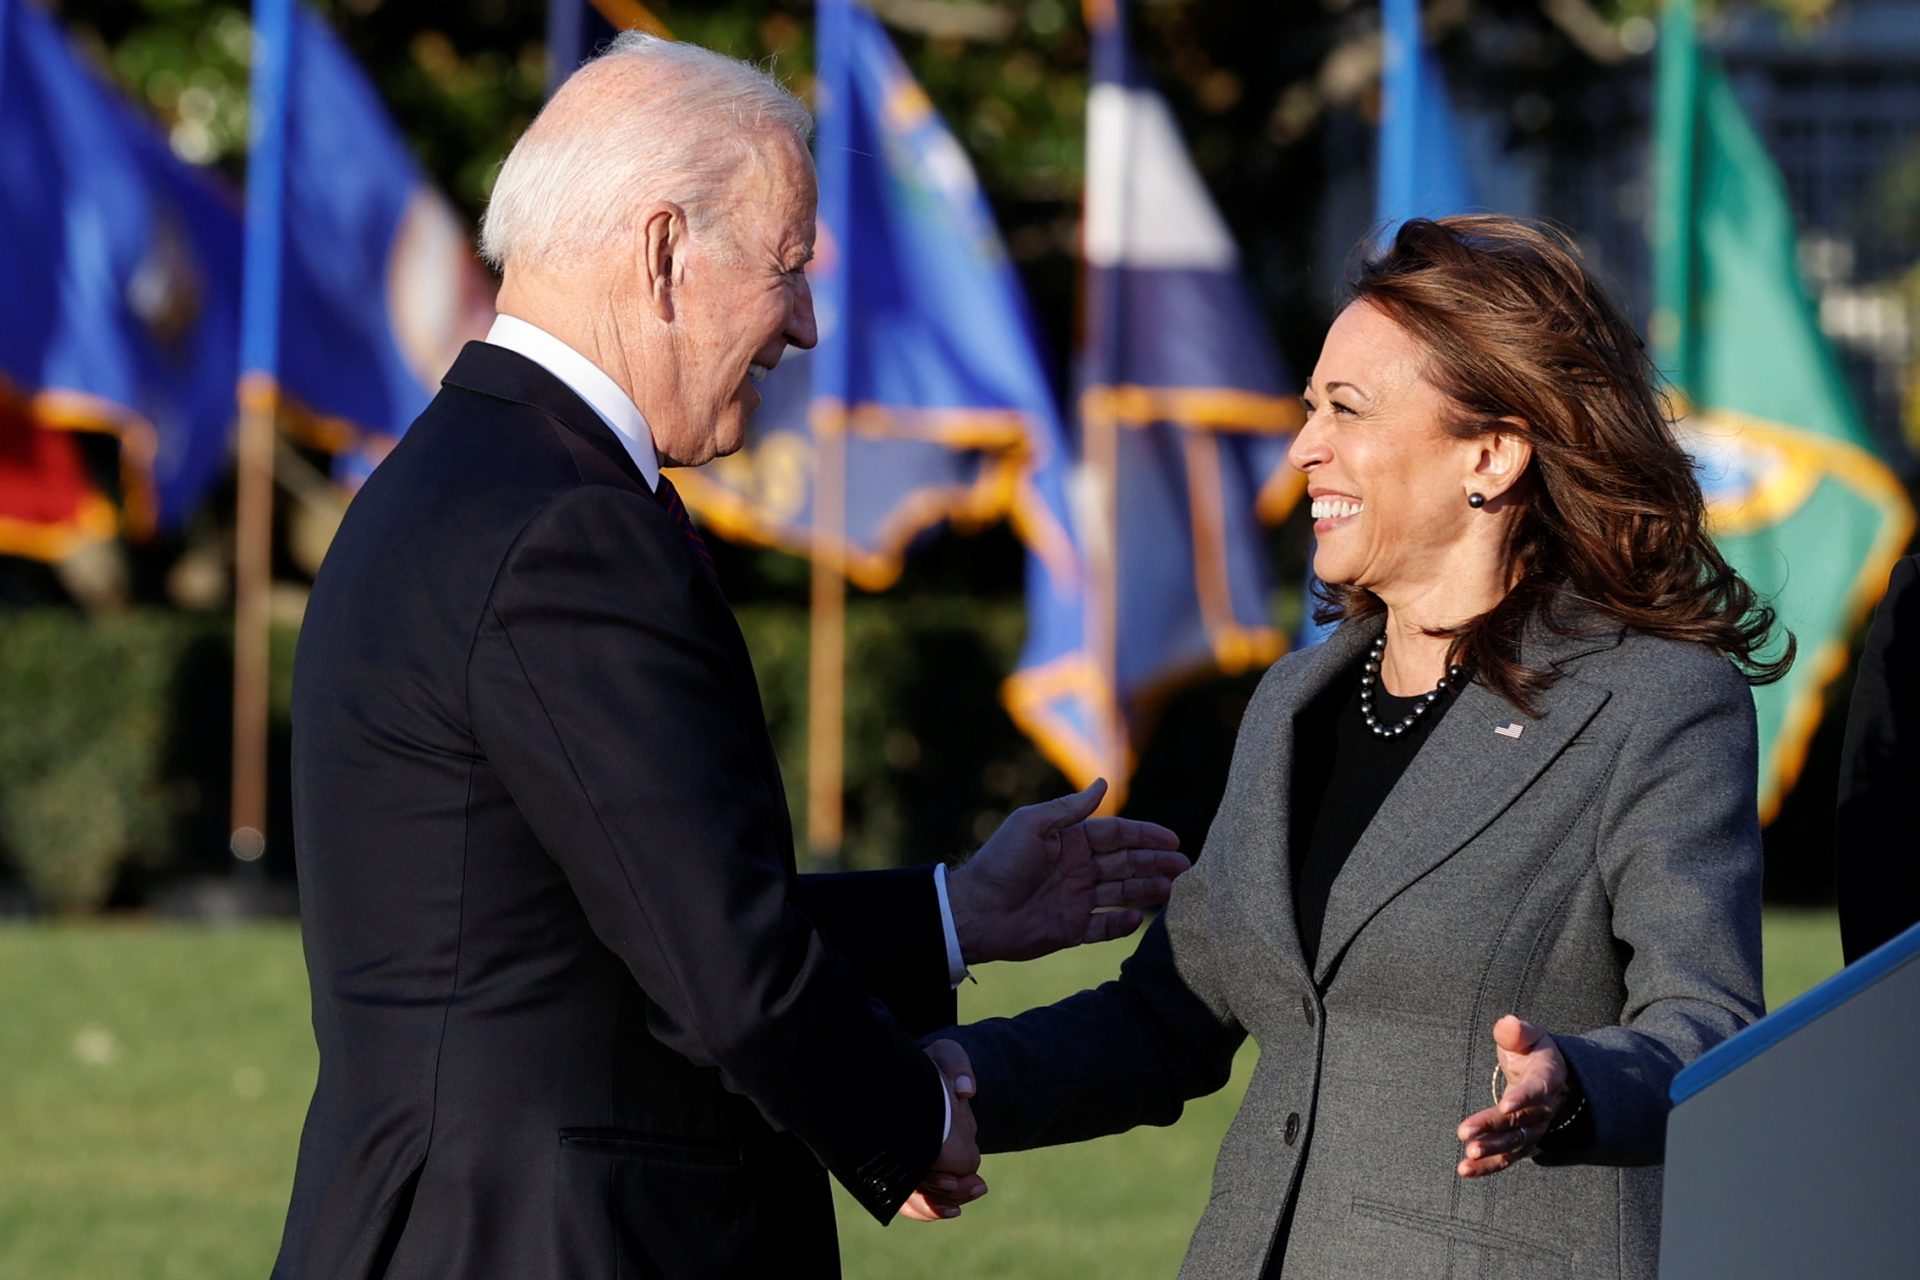 Biden takes presidency back from Harris after 2 hours